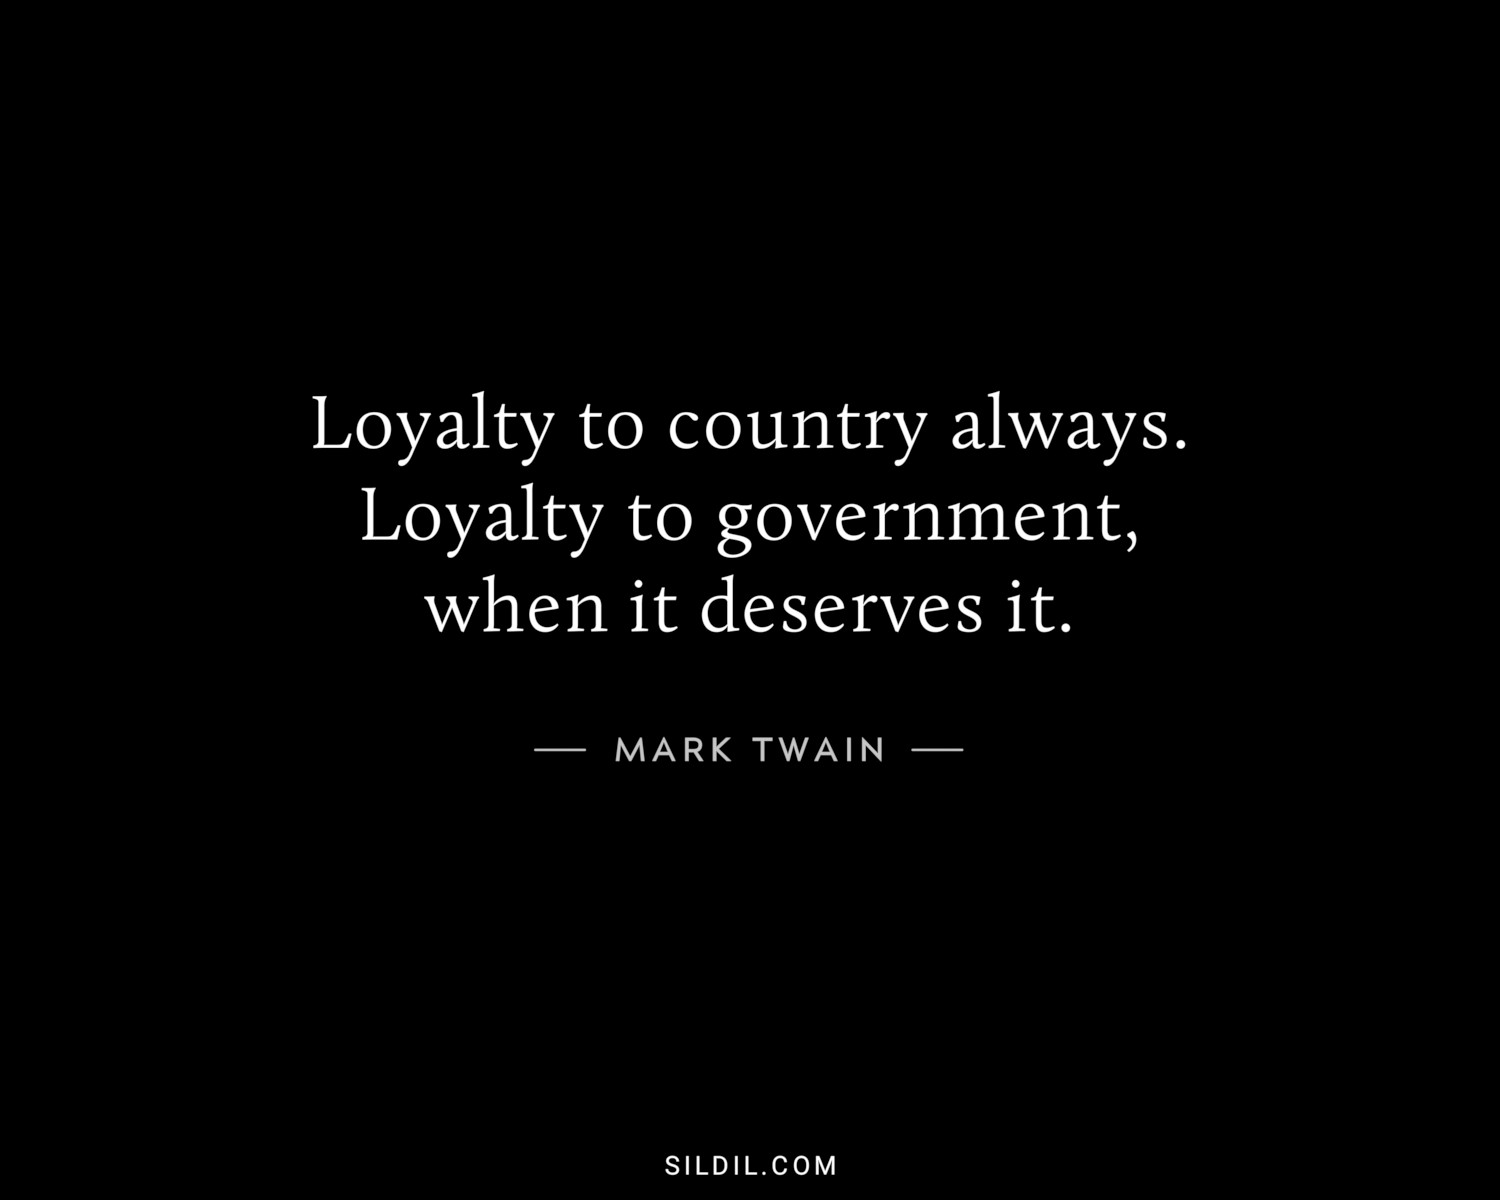 Loyalty to country always. Loyalty to government, when it deserves it.